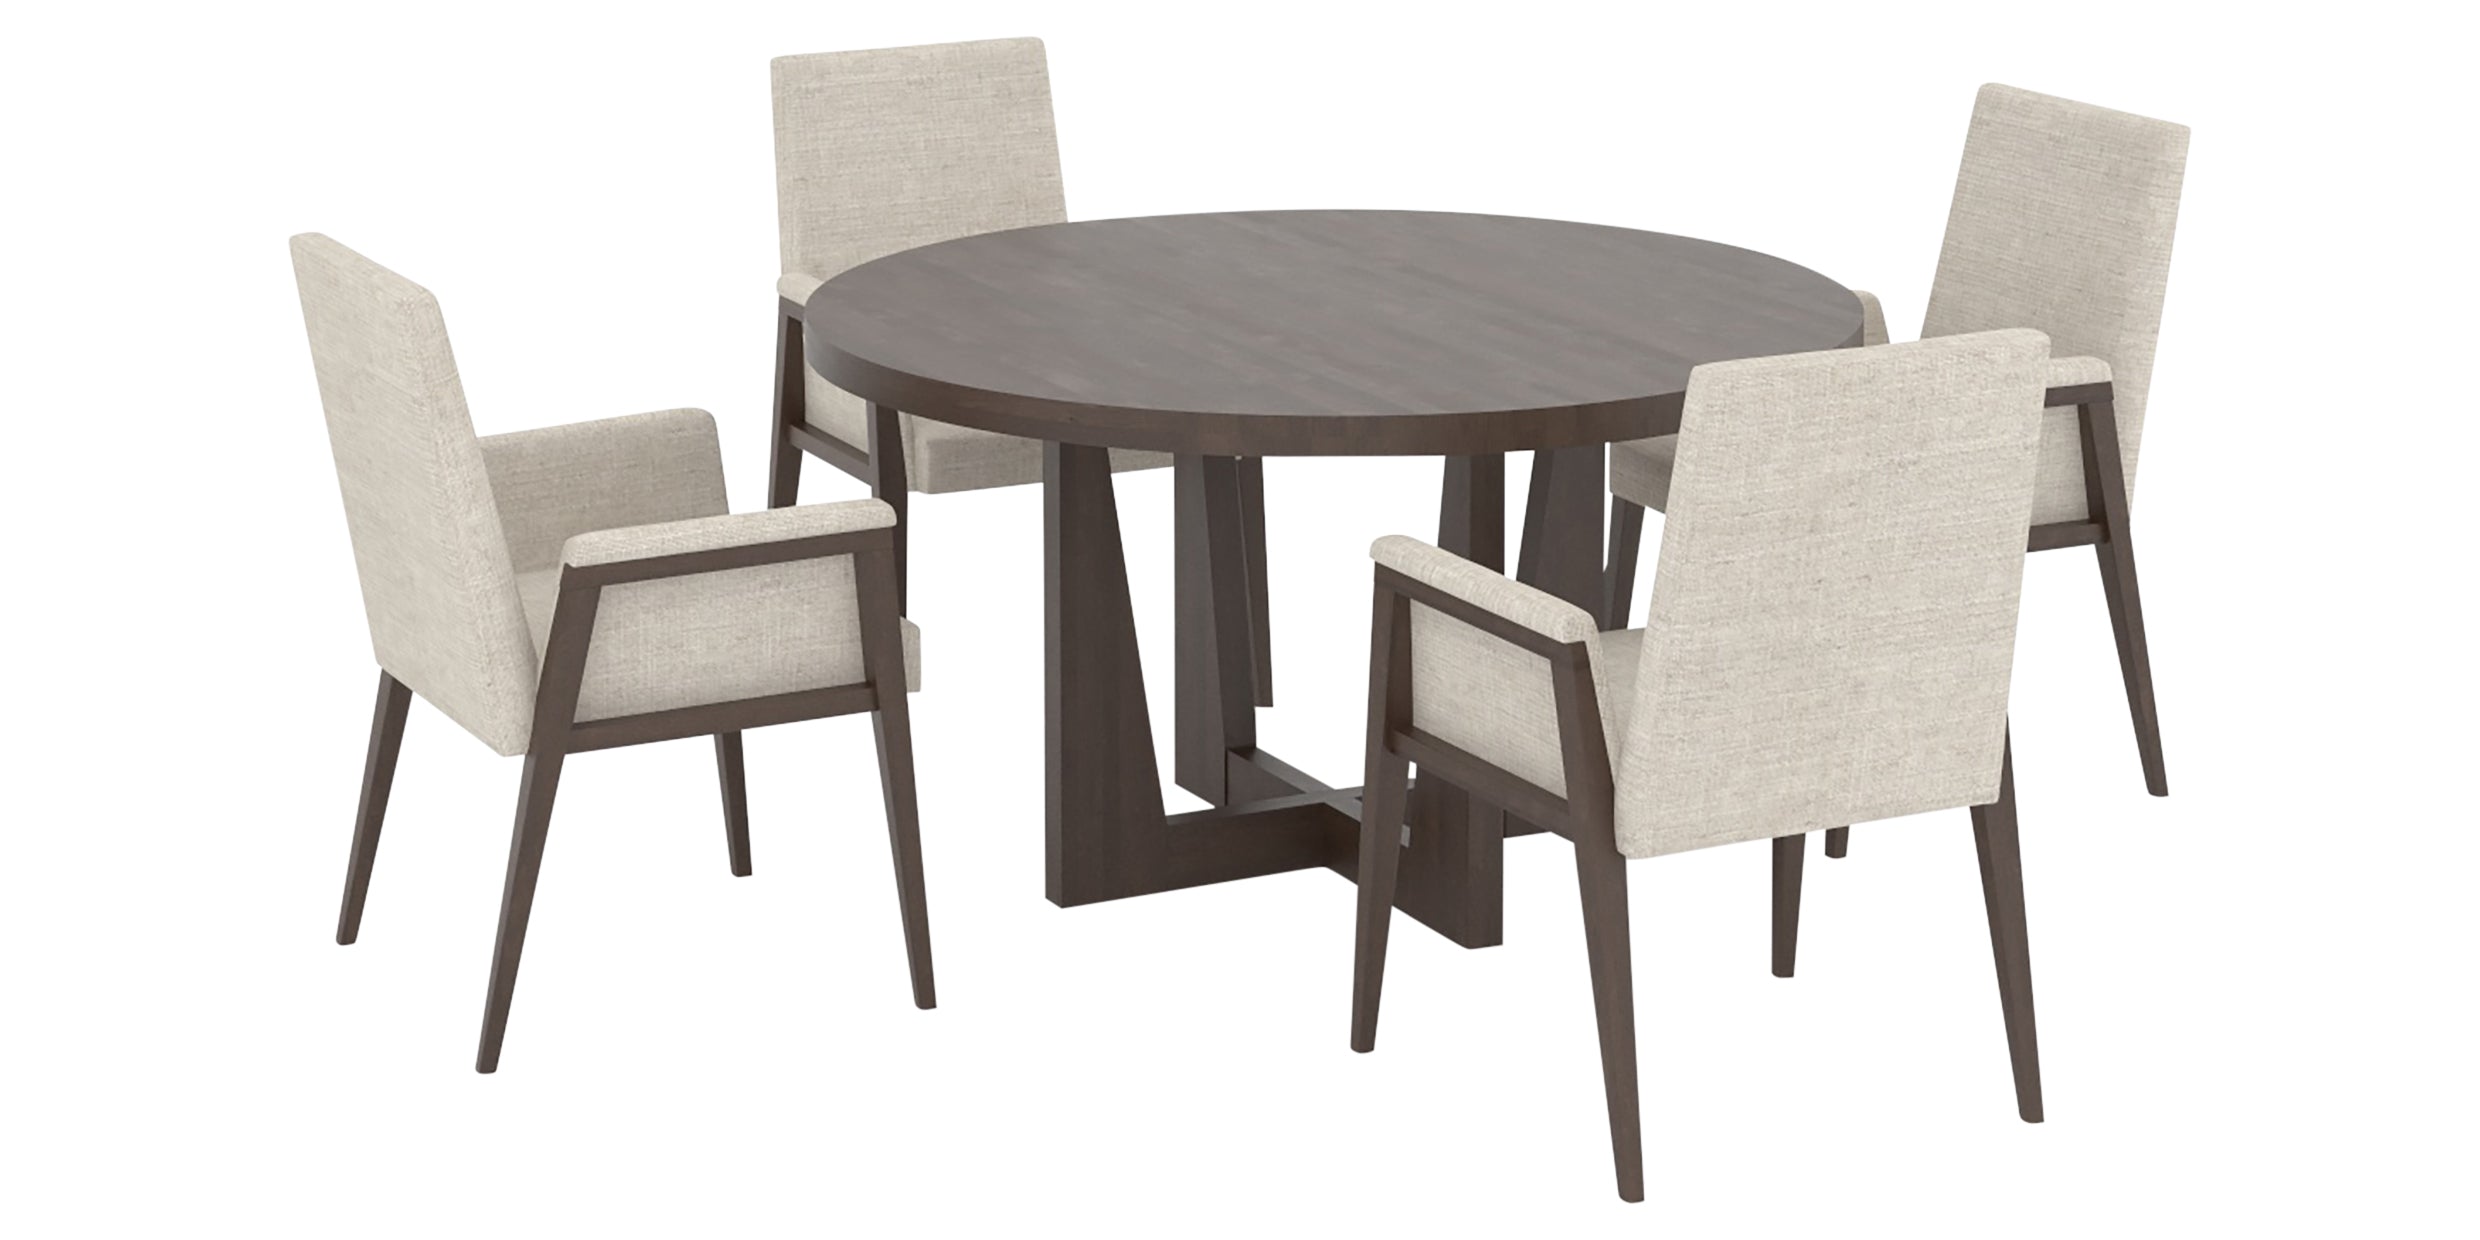 Hazelnut Washed Birch with Matte Finish and AL Fabric | Canadel Modern 5454 Dining Set - Floor Model | Valley Ridge Furniture